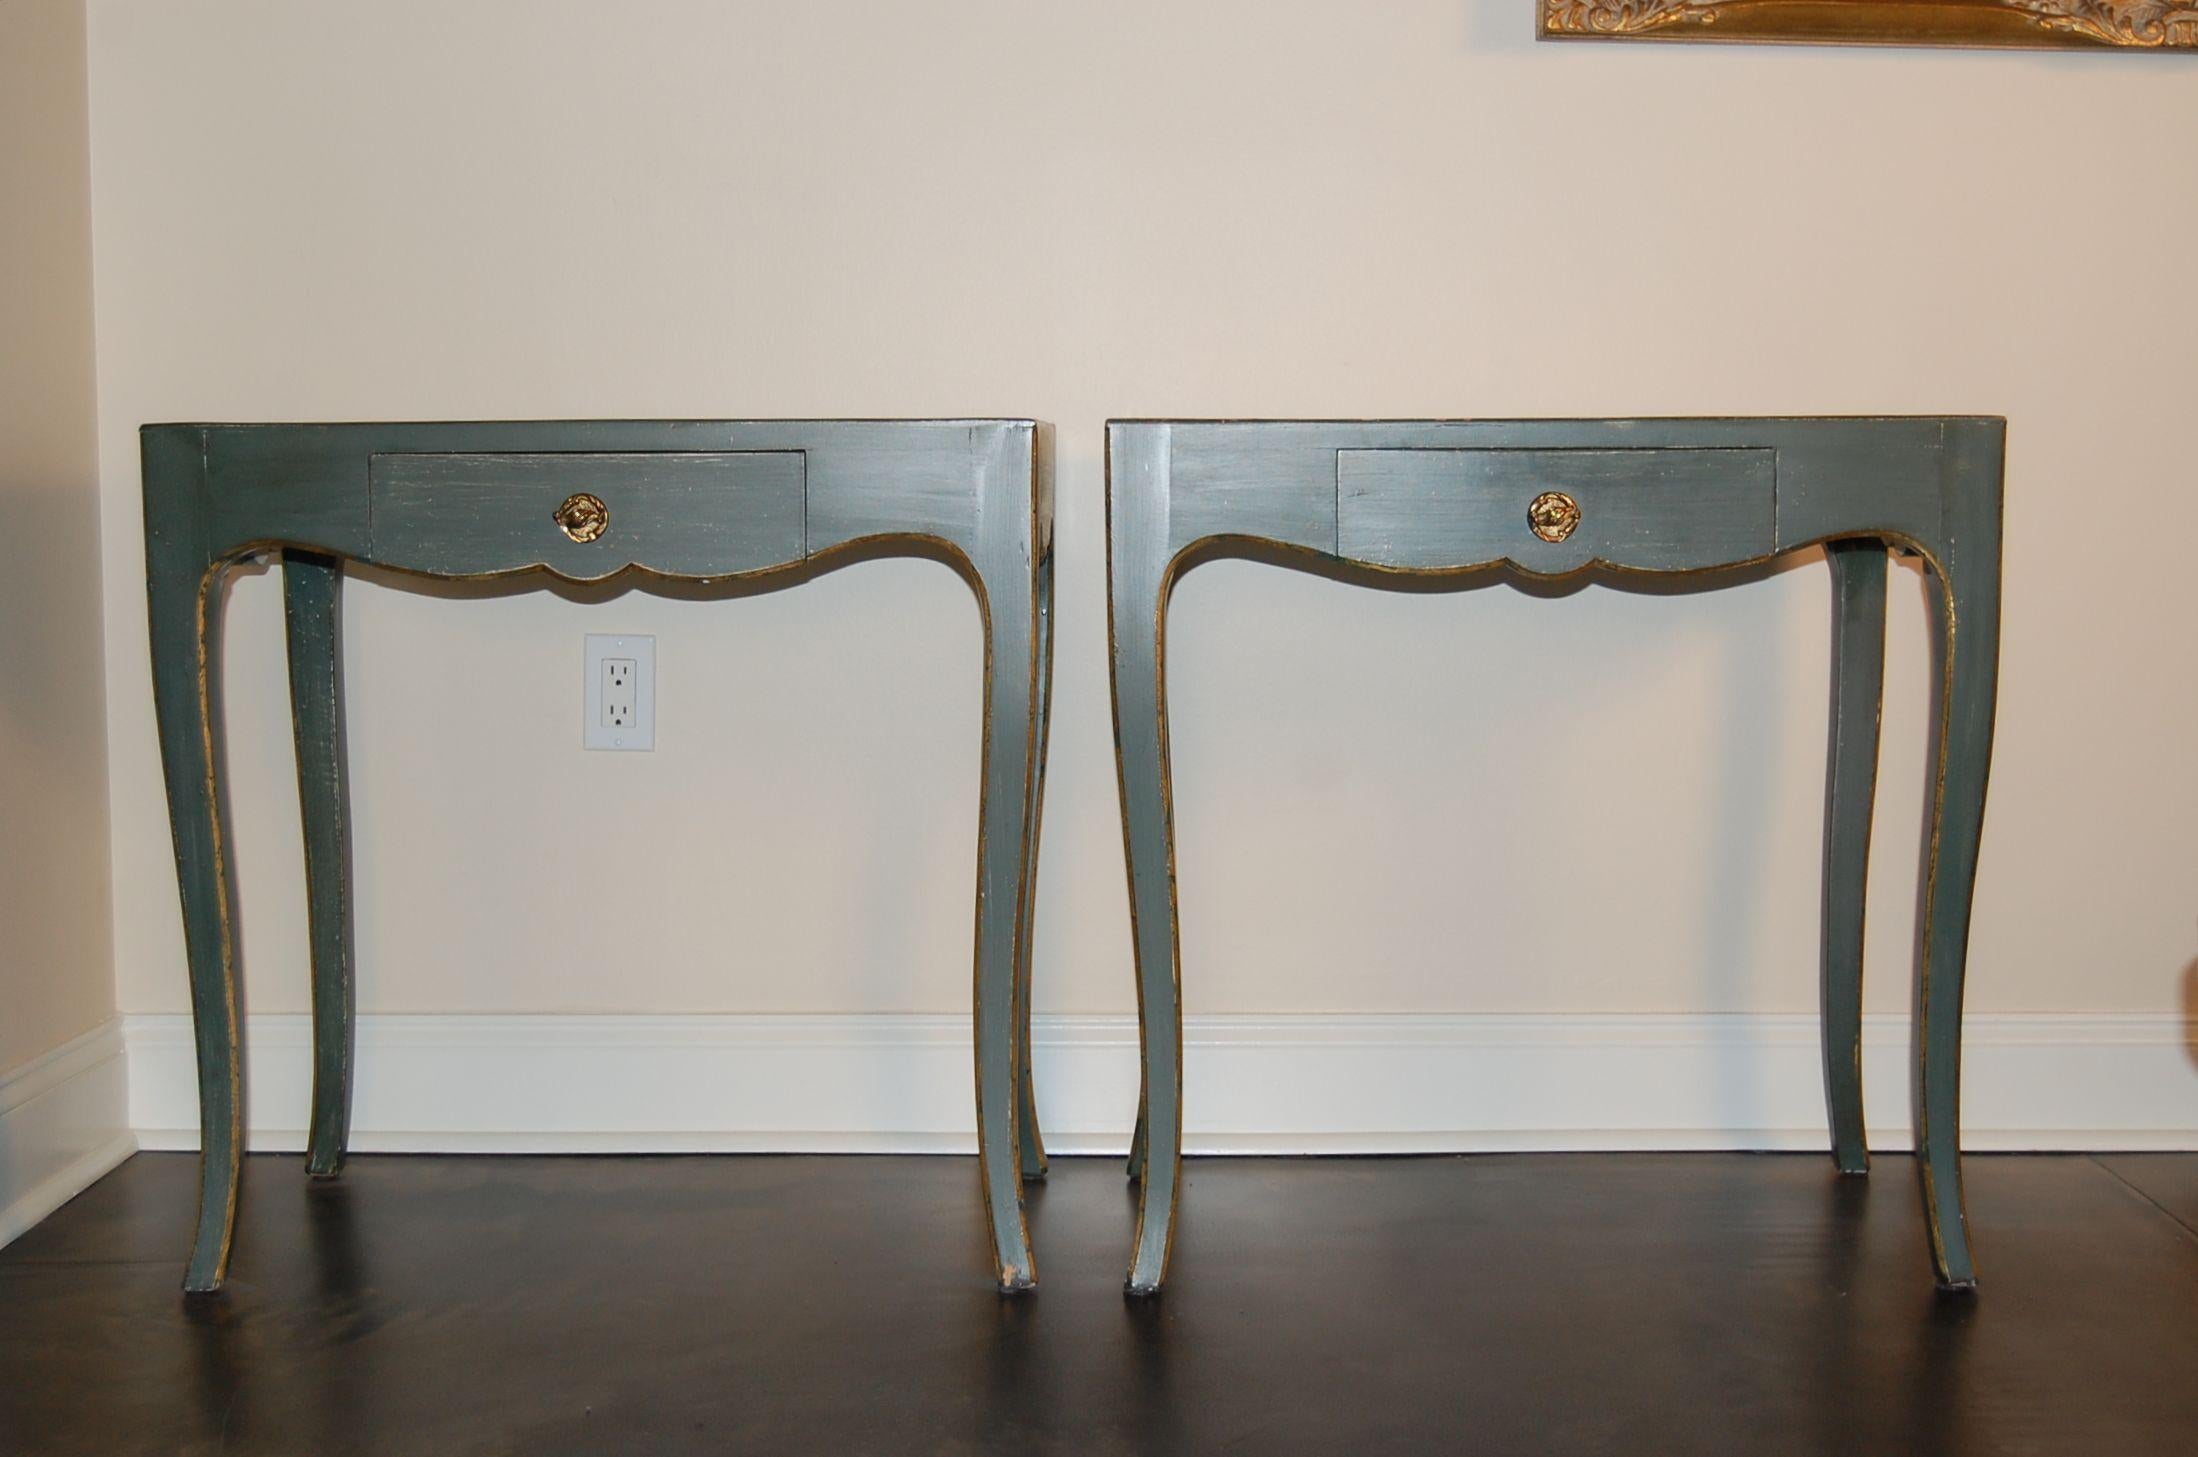 A pair of green painted side tables with drawers custom made by The Guild Furniture Crafters Company in Pittsburgh, PA, circa 2000. Each table has one drawer and finely shaped and tapered legs. The finish was purposely distressed to give the tables